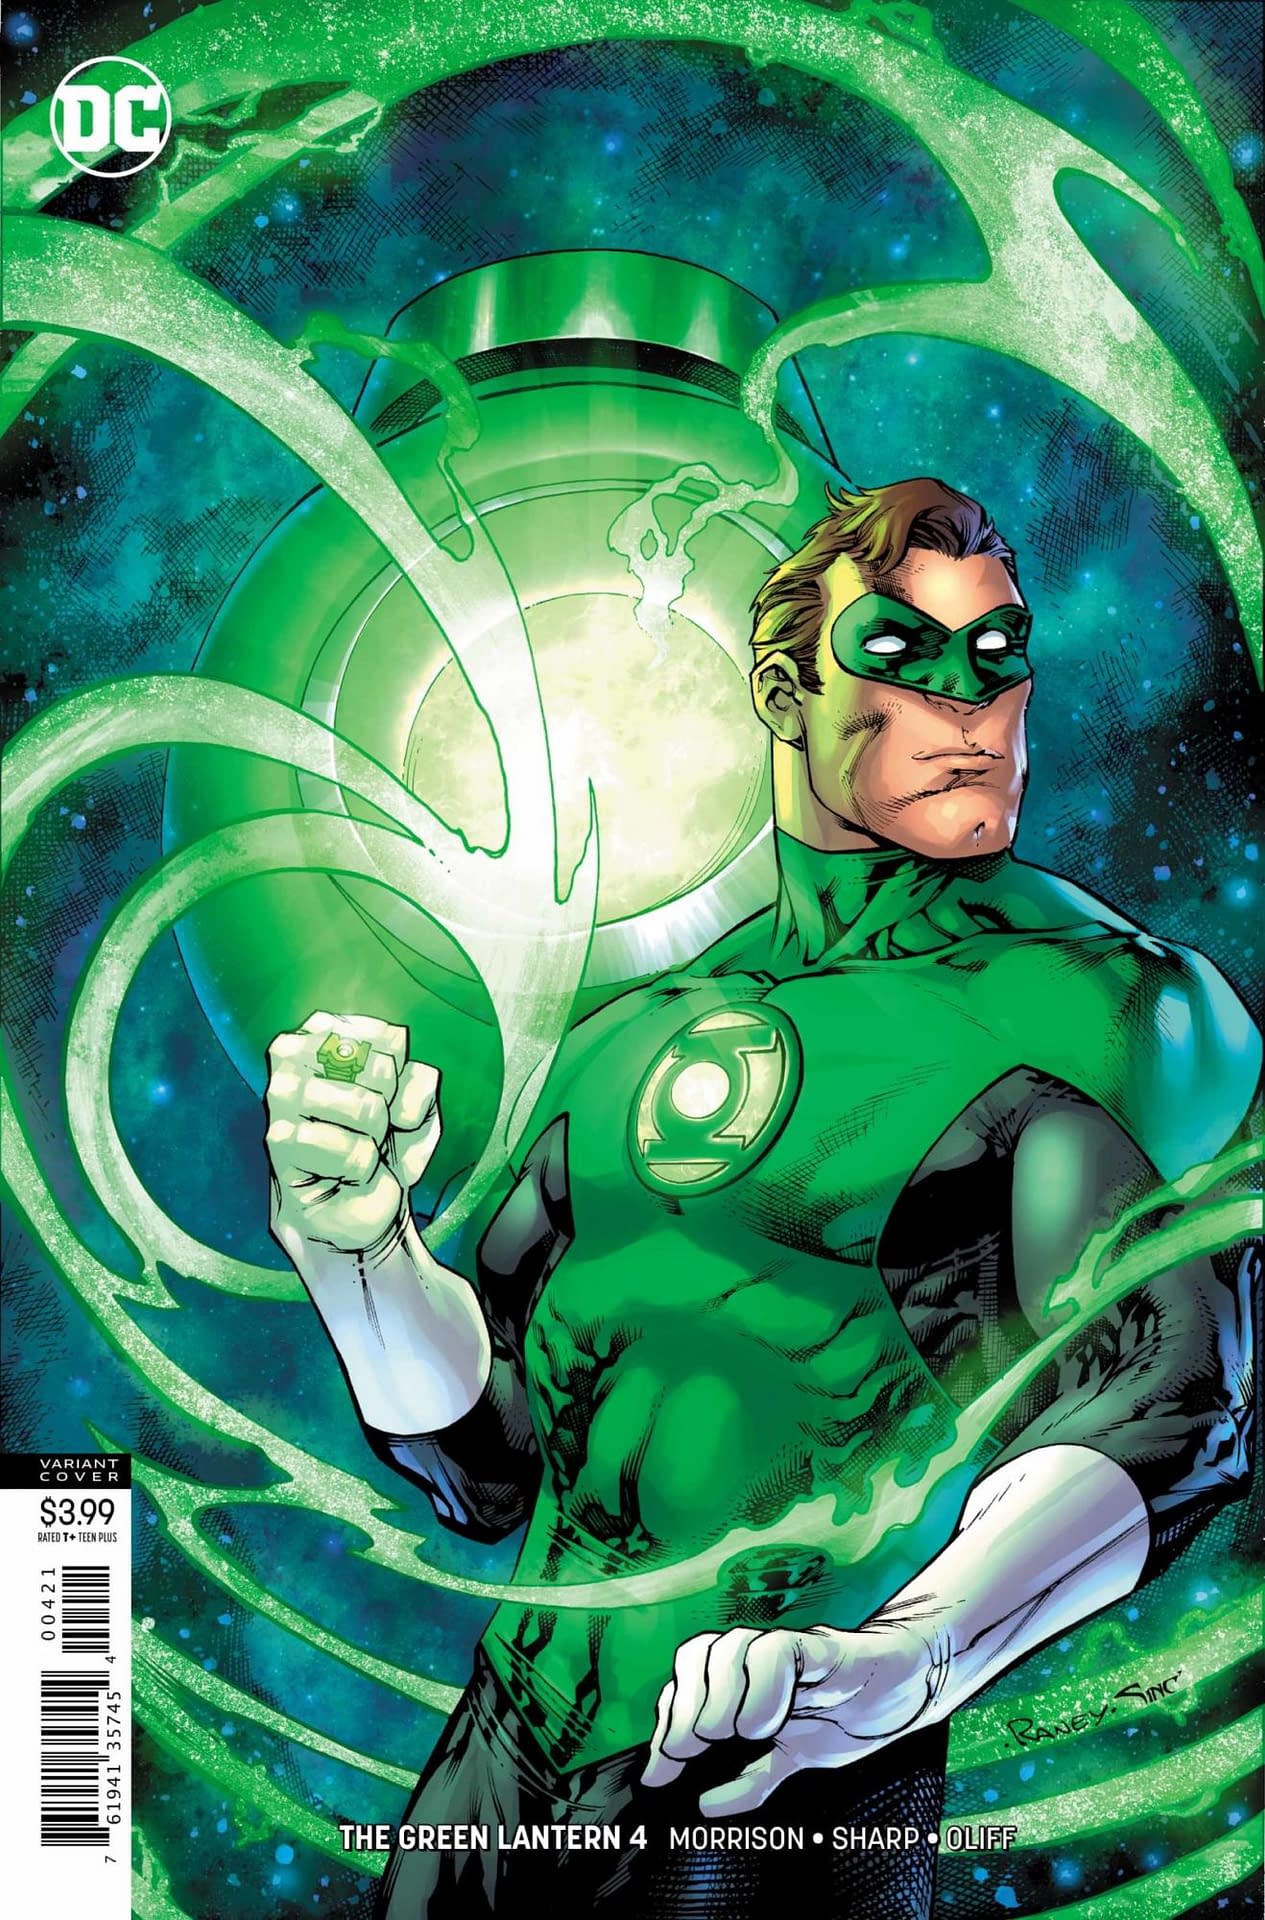 See What's in the Vault in this Preview of The Green Lantern #4